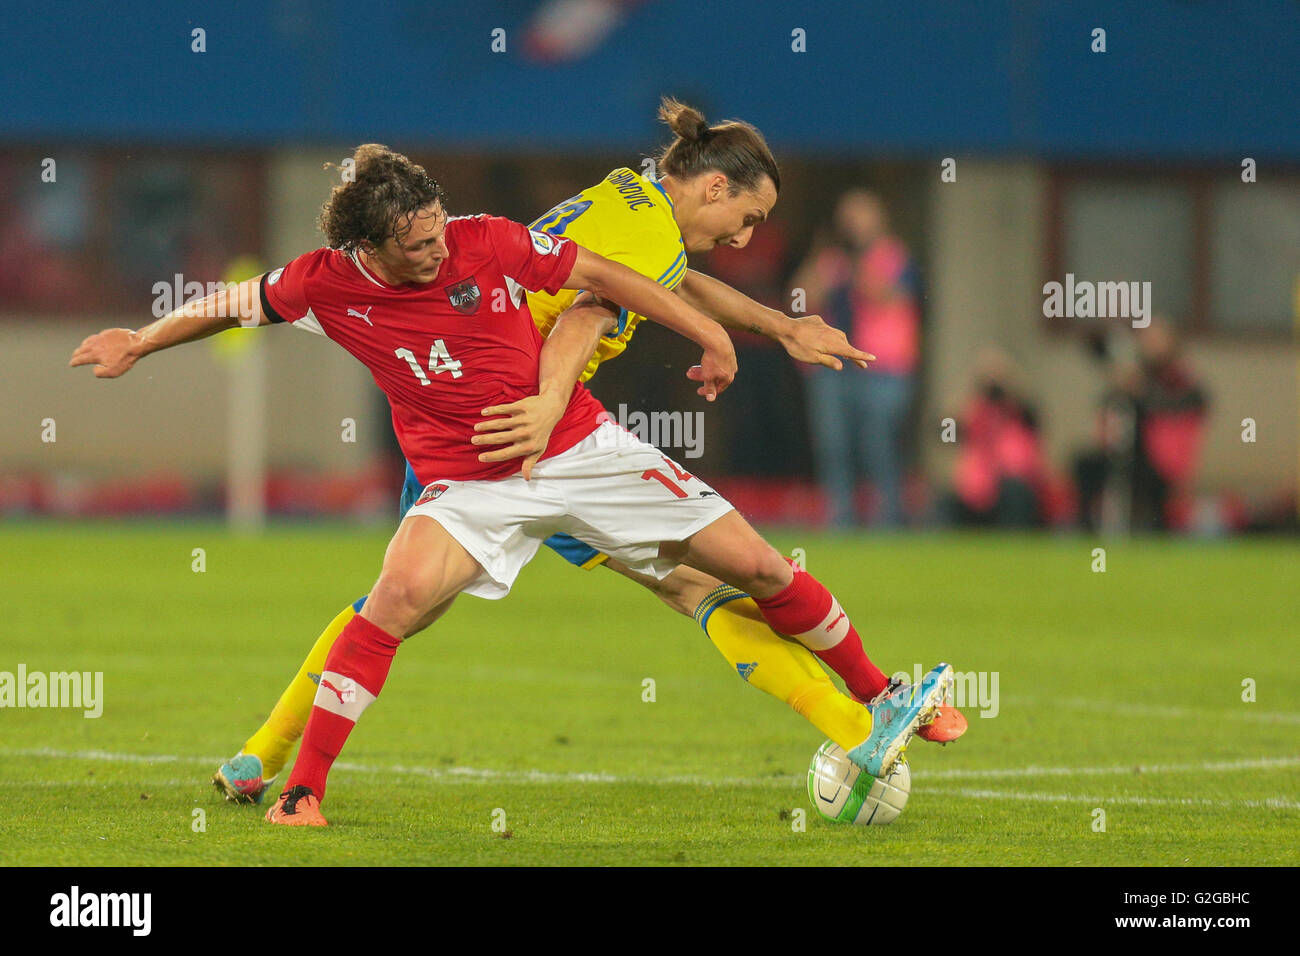 Julian Baumgartlinger, No. 14 Austria, and Zlatan Ibrahimovic, No. 10 Sweden, fight for the ball during the world cup qualifier Stock Photo